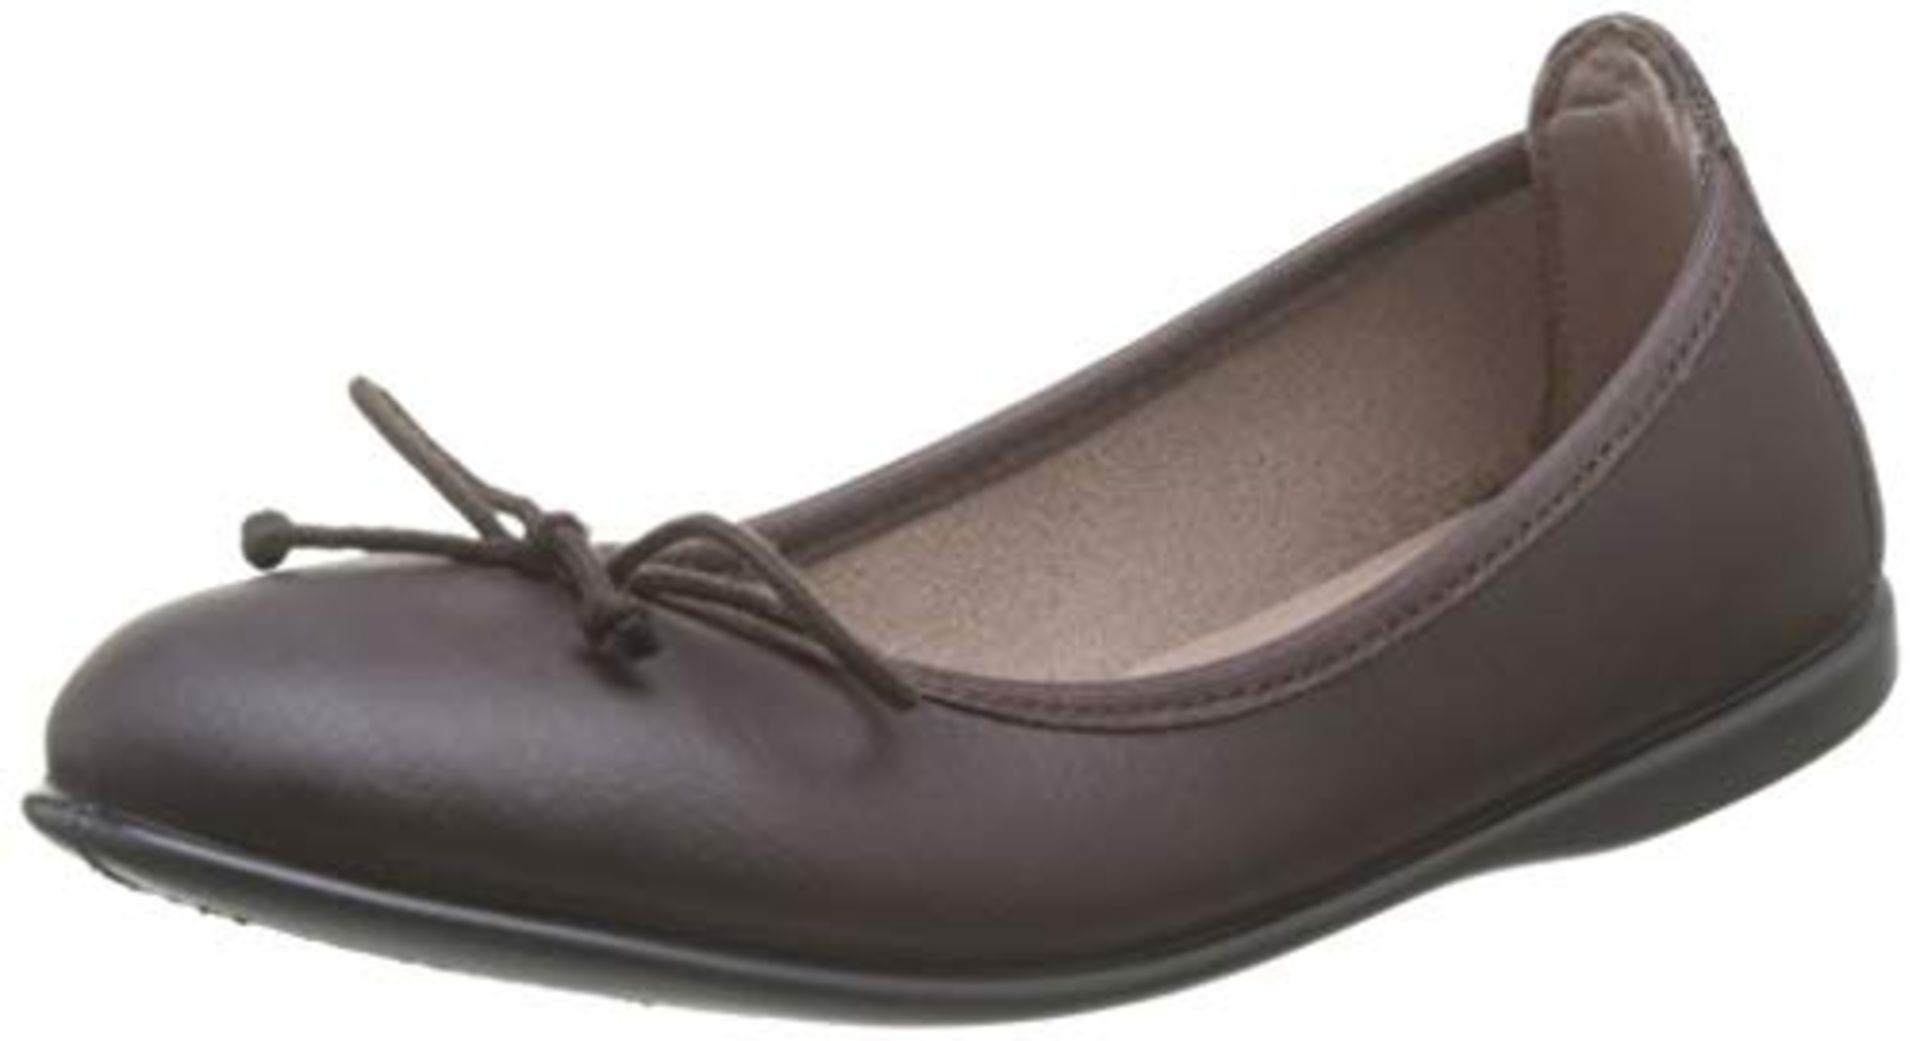 GIOSEPPO Boy's Girls’ Voltaire Closed Toe Ballet Flats, Brown (Marron Marrón), 8 UK Child RRP £15